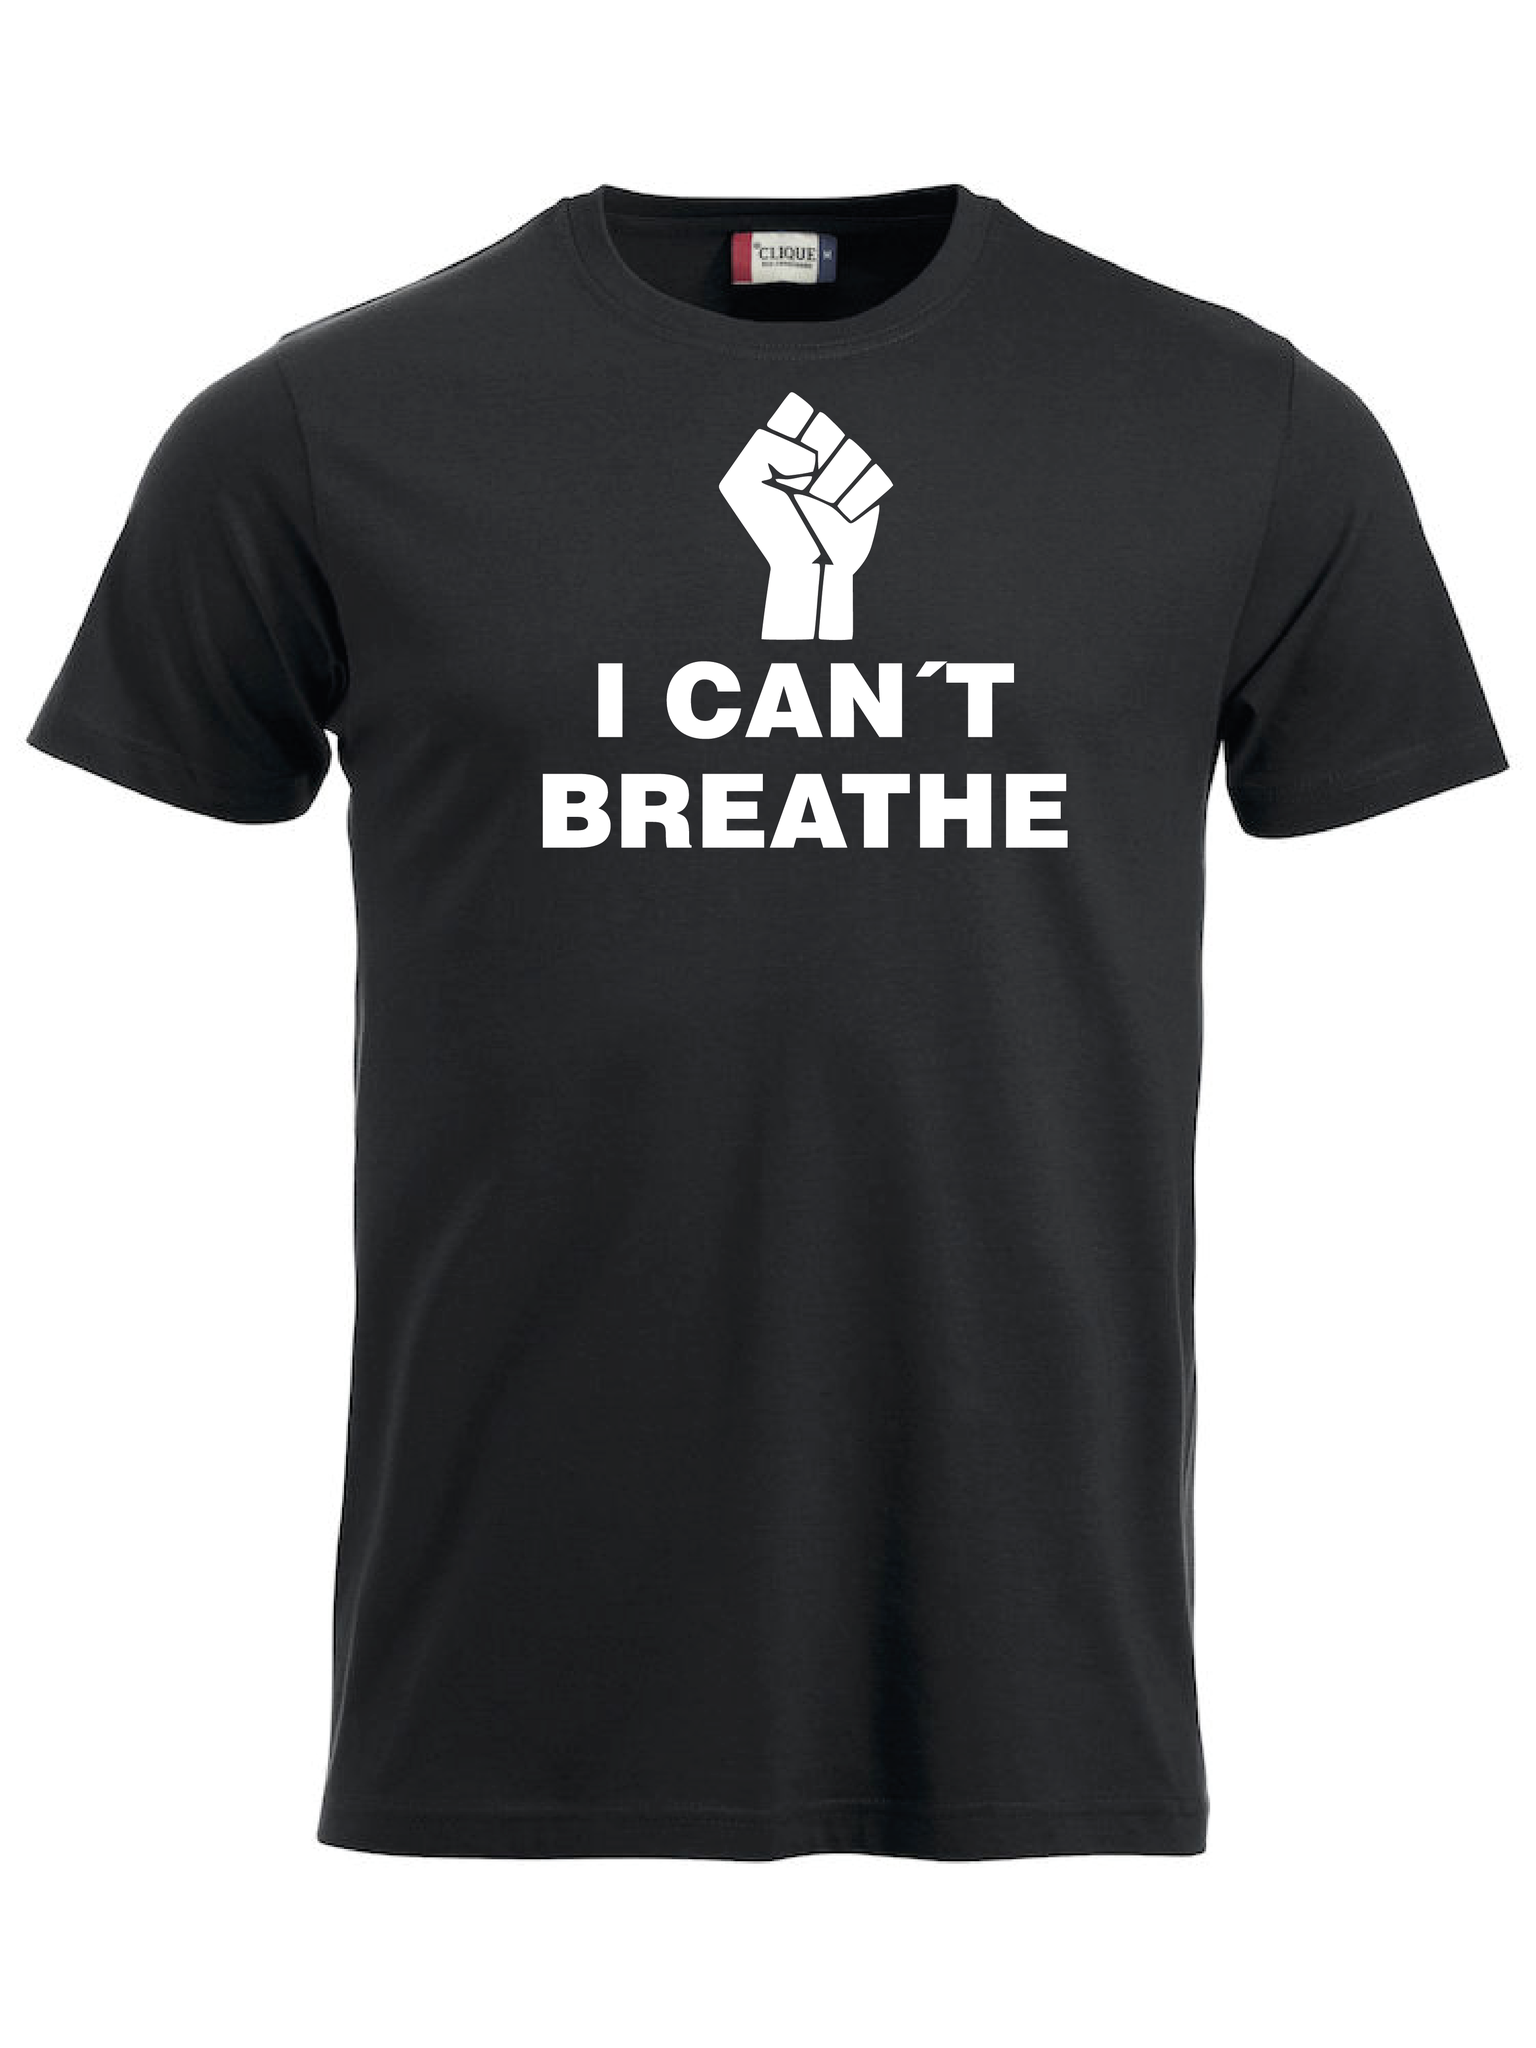 T-shirt "I CAN´T BREATHE"